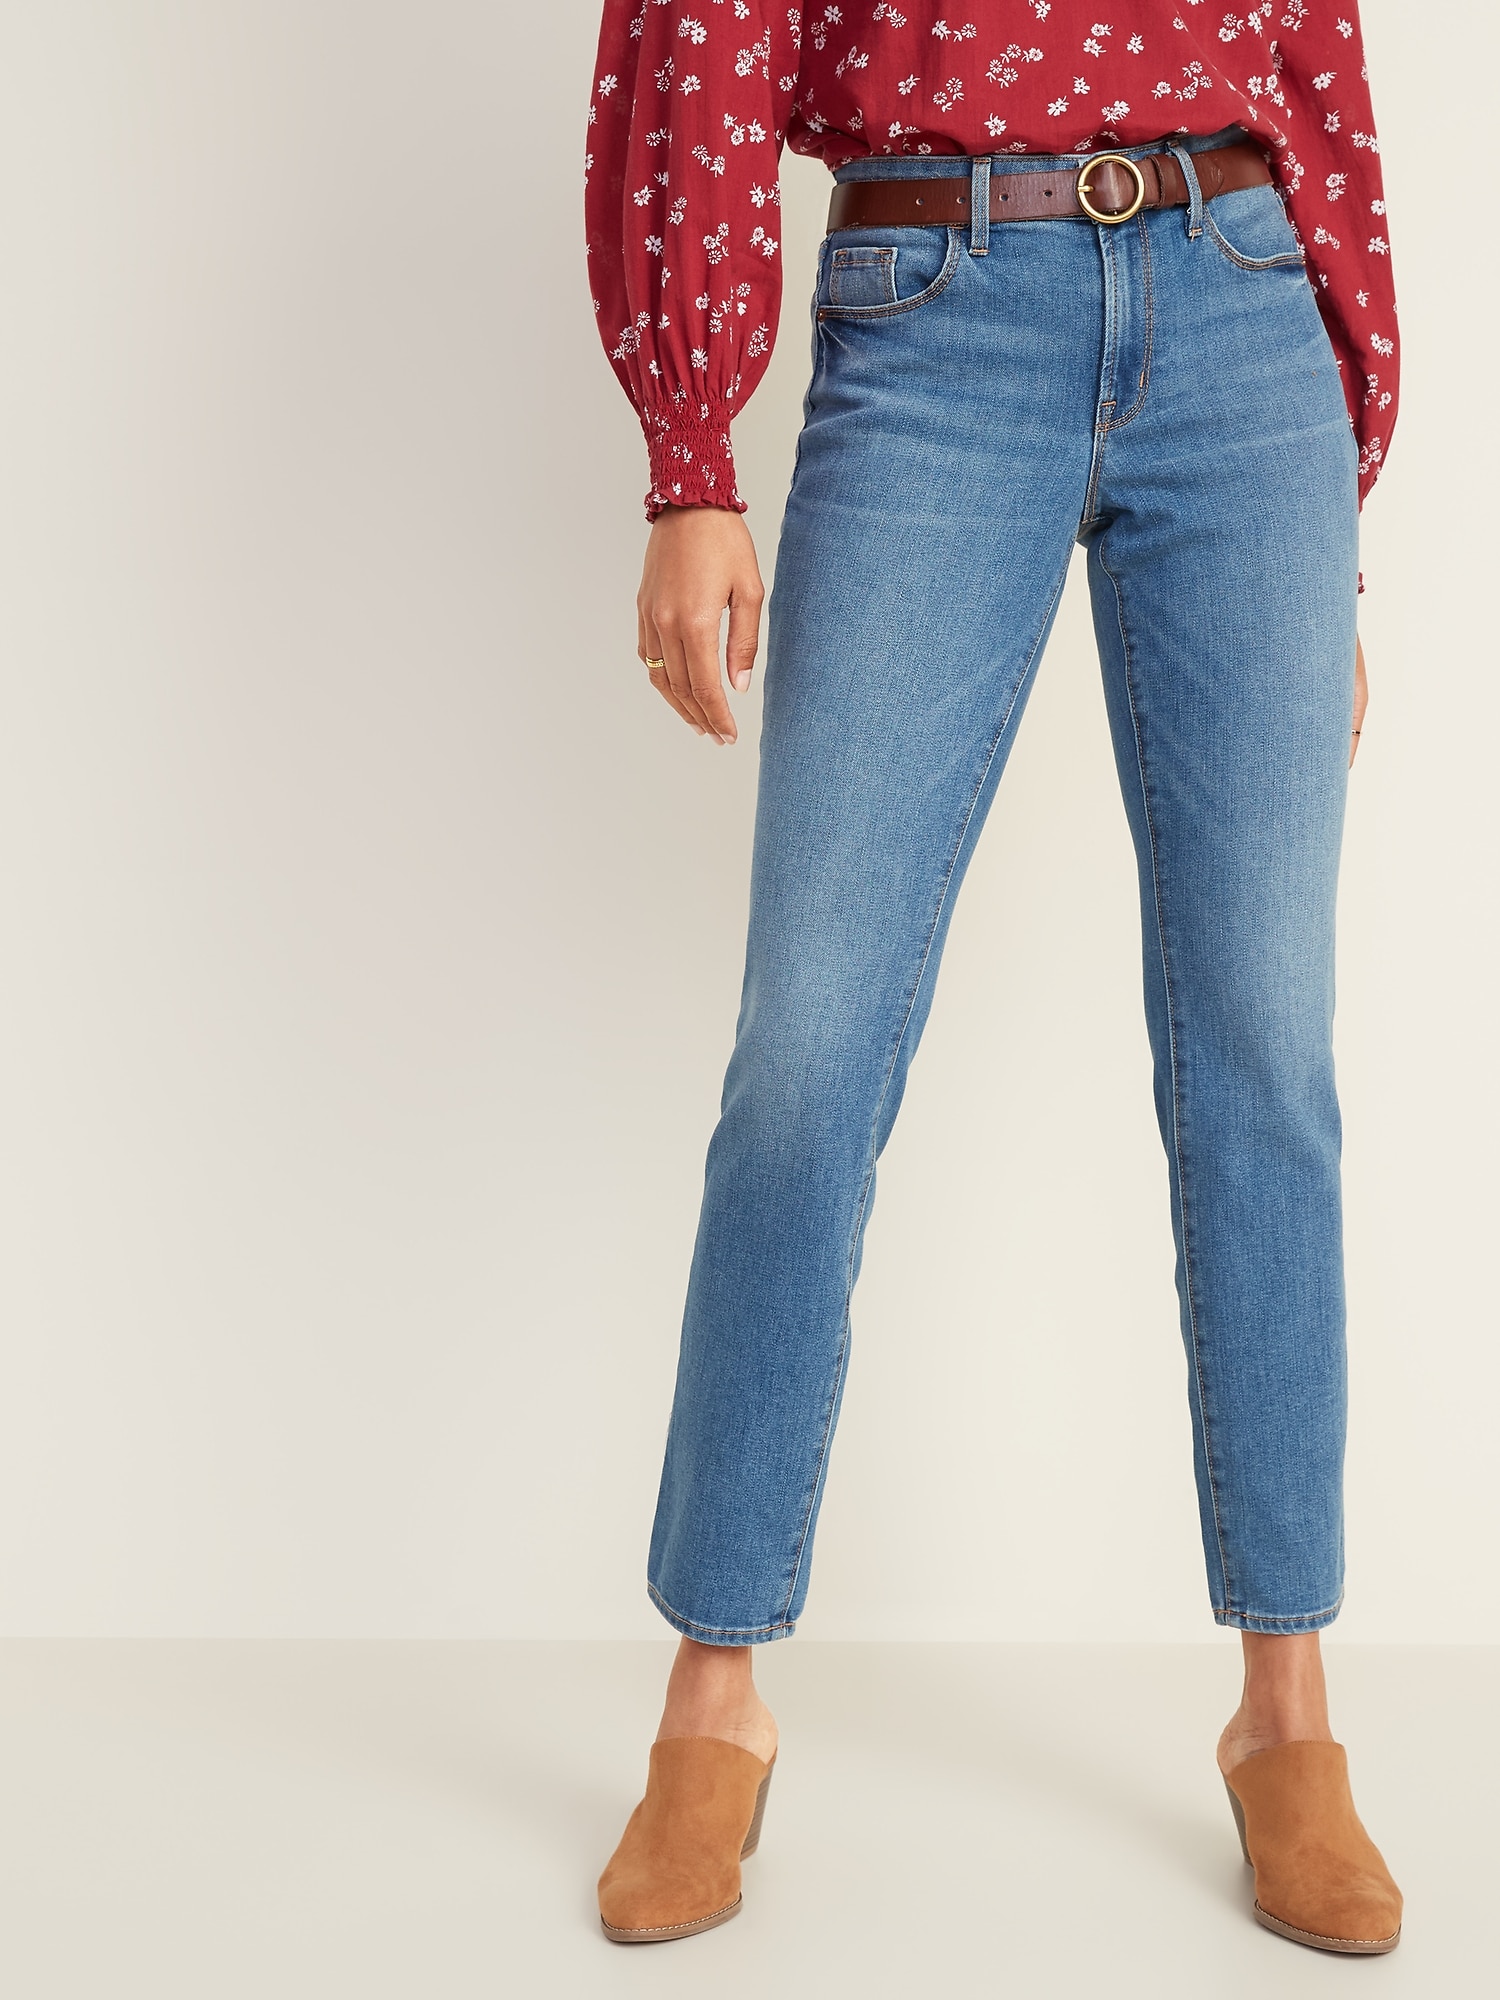 old navy original straight jeans